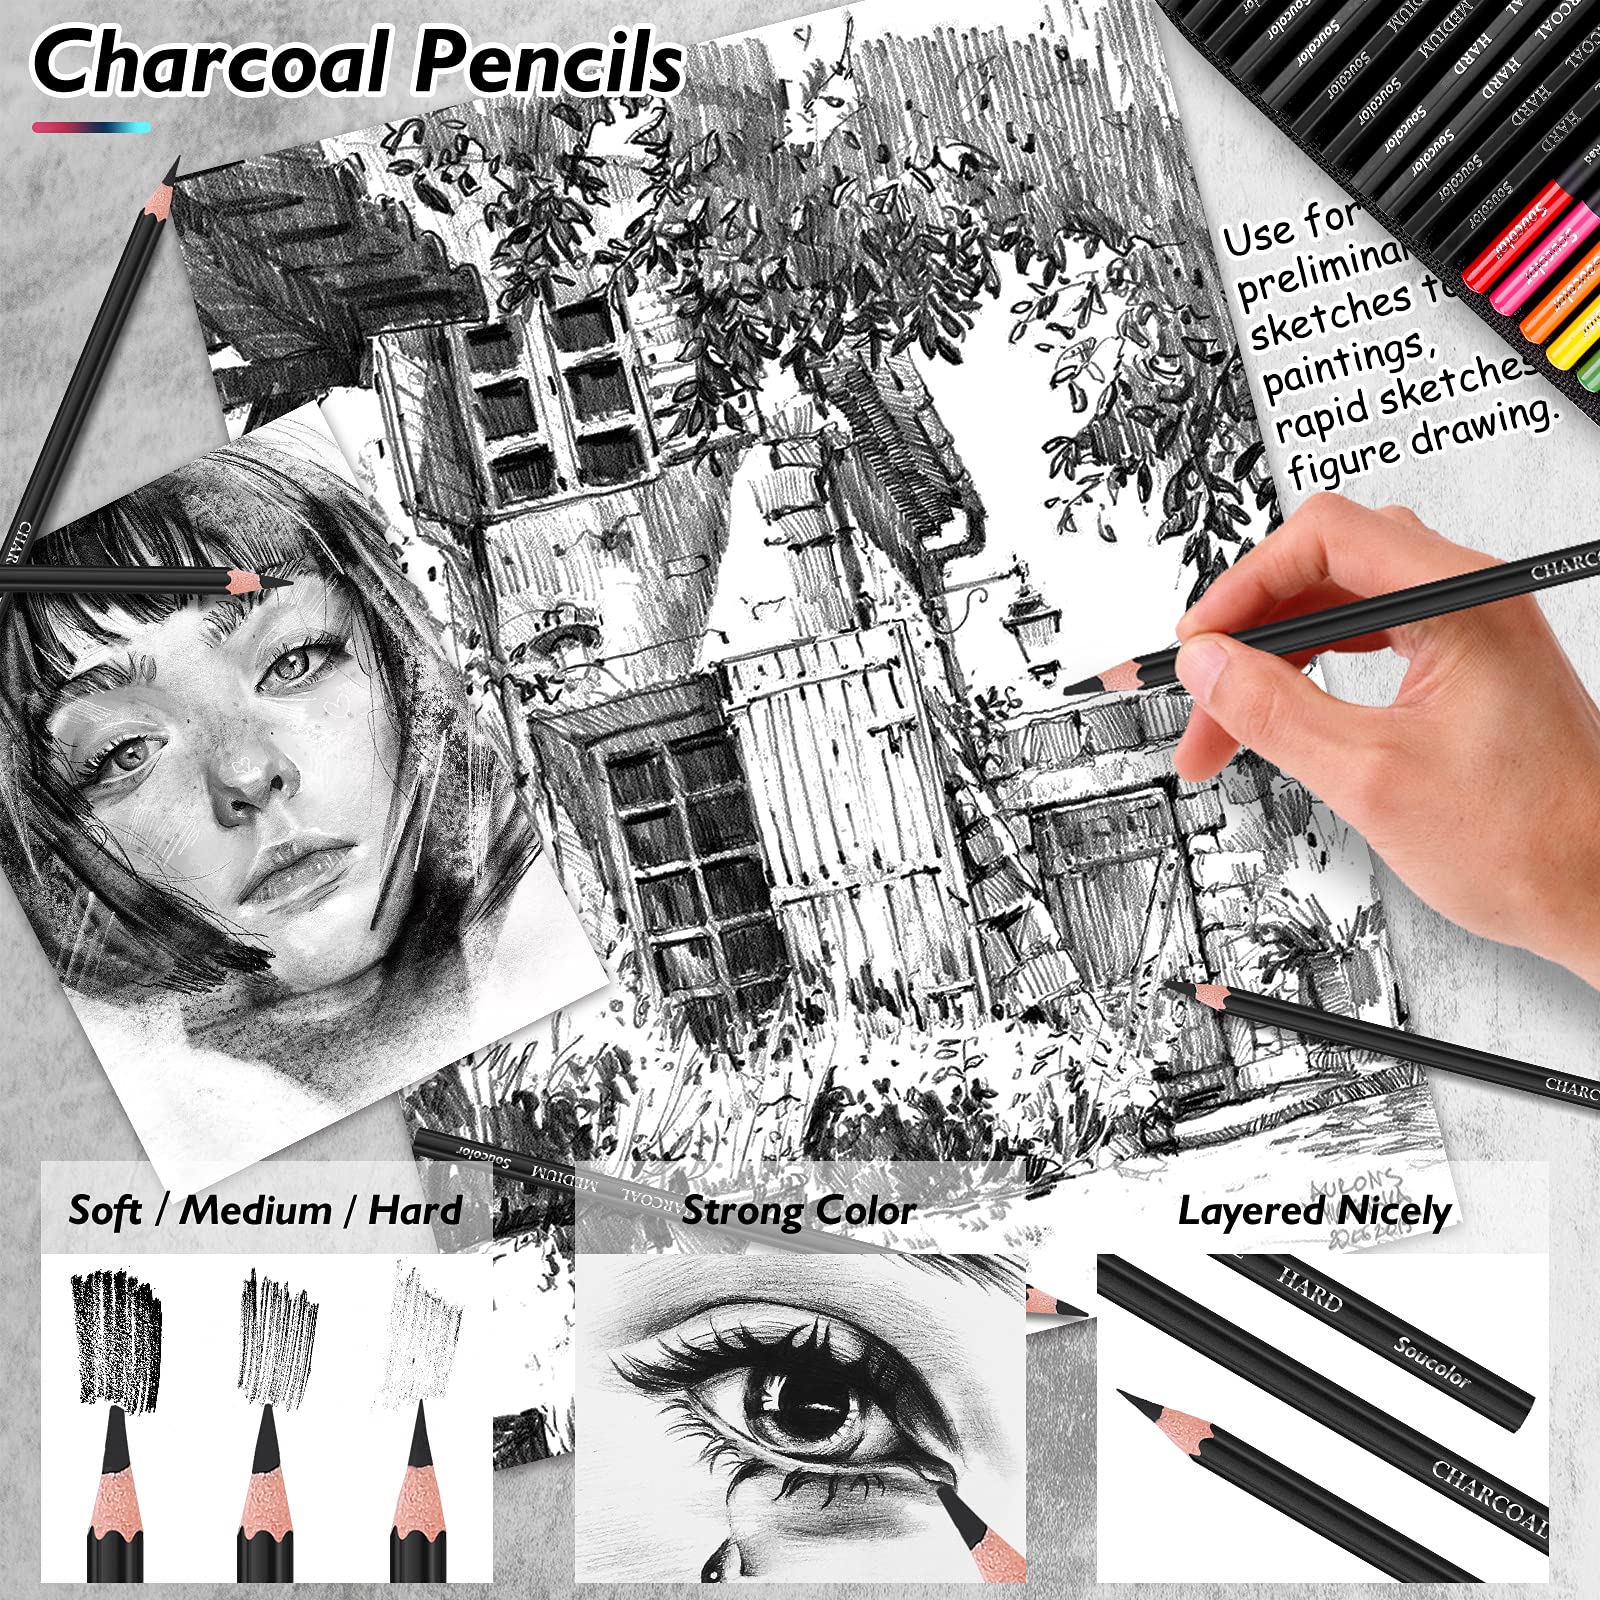 Tioucd 73 Pcs Drawing Kit – Professional Art Supplies Drawing Set with  Graphite, Charcoal, Colored Watercolor, Metallic Pencils, Sketchbook for